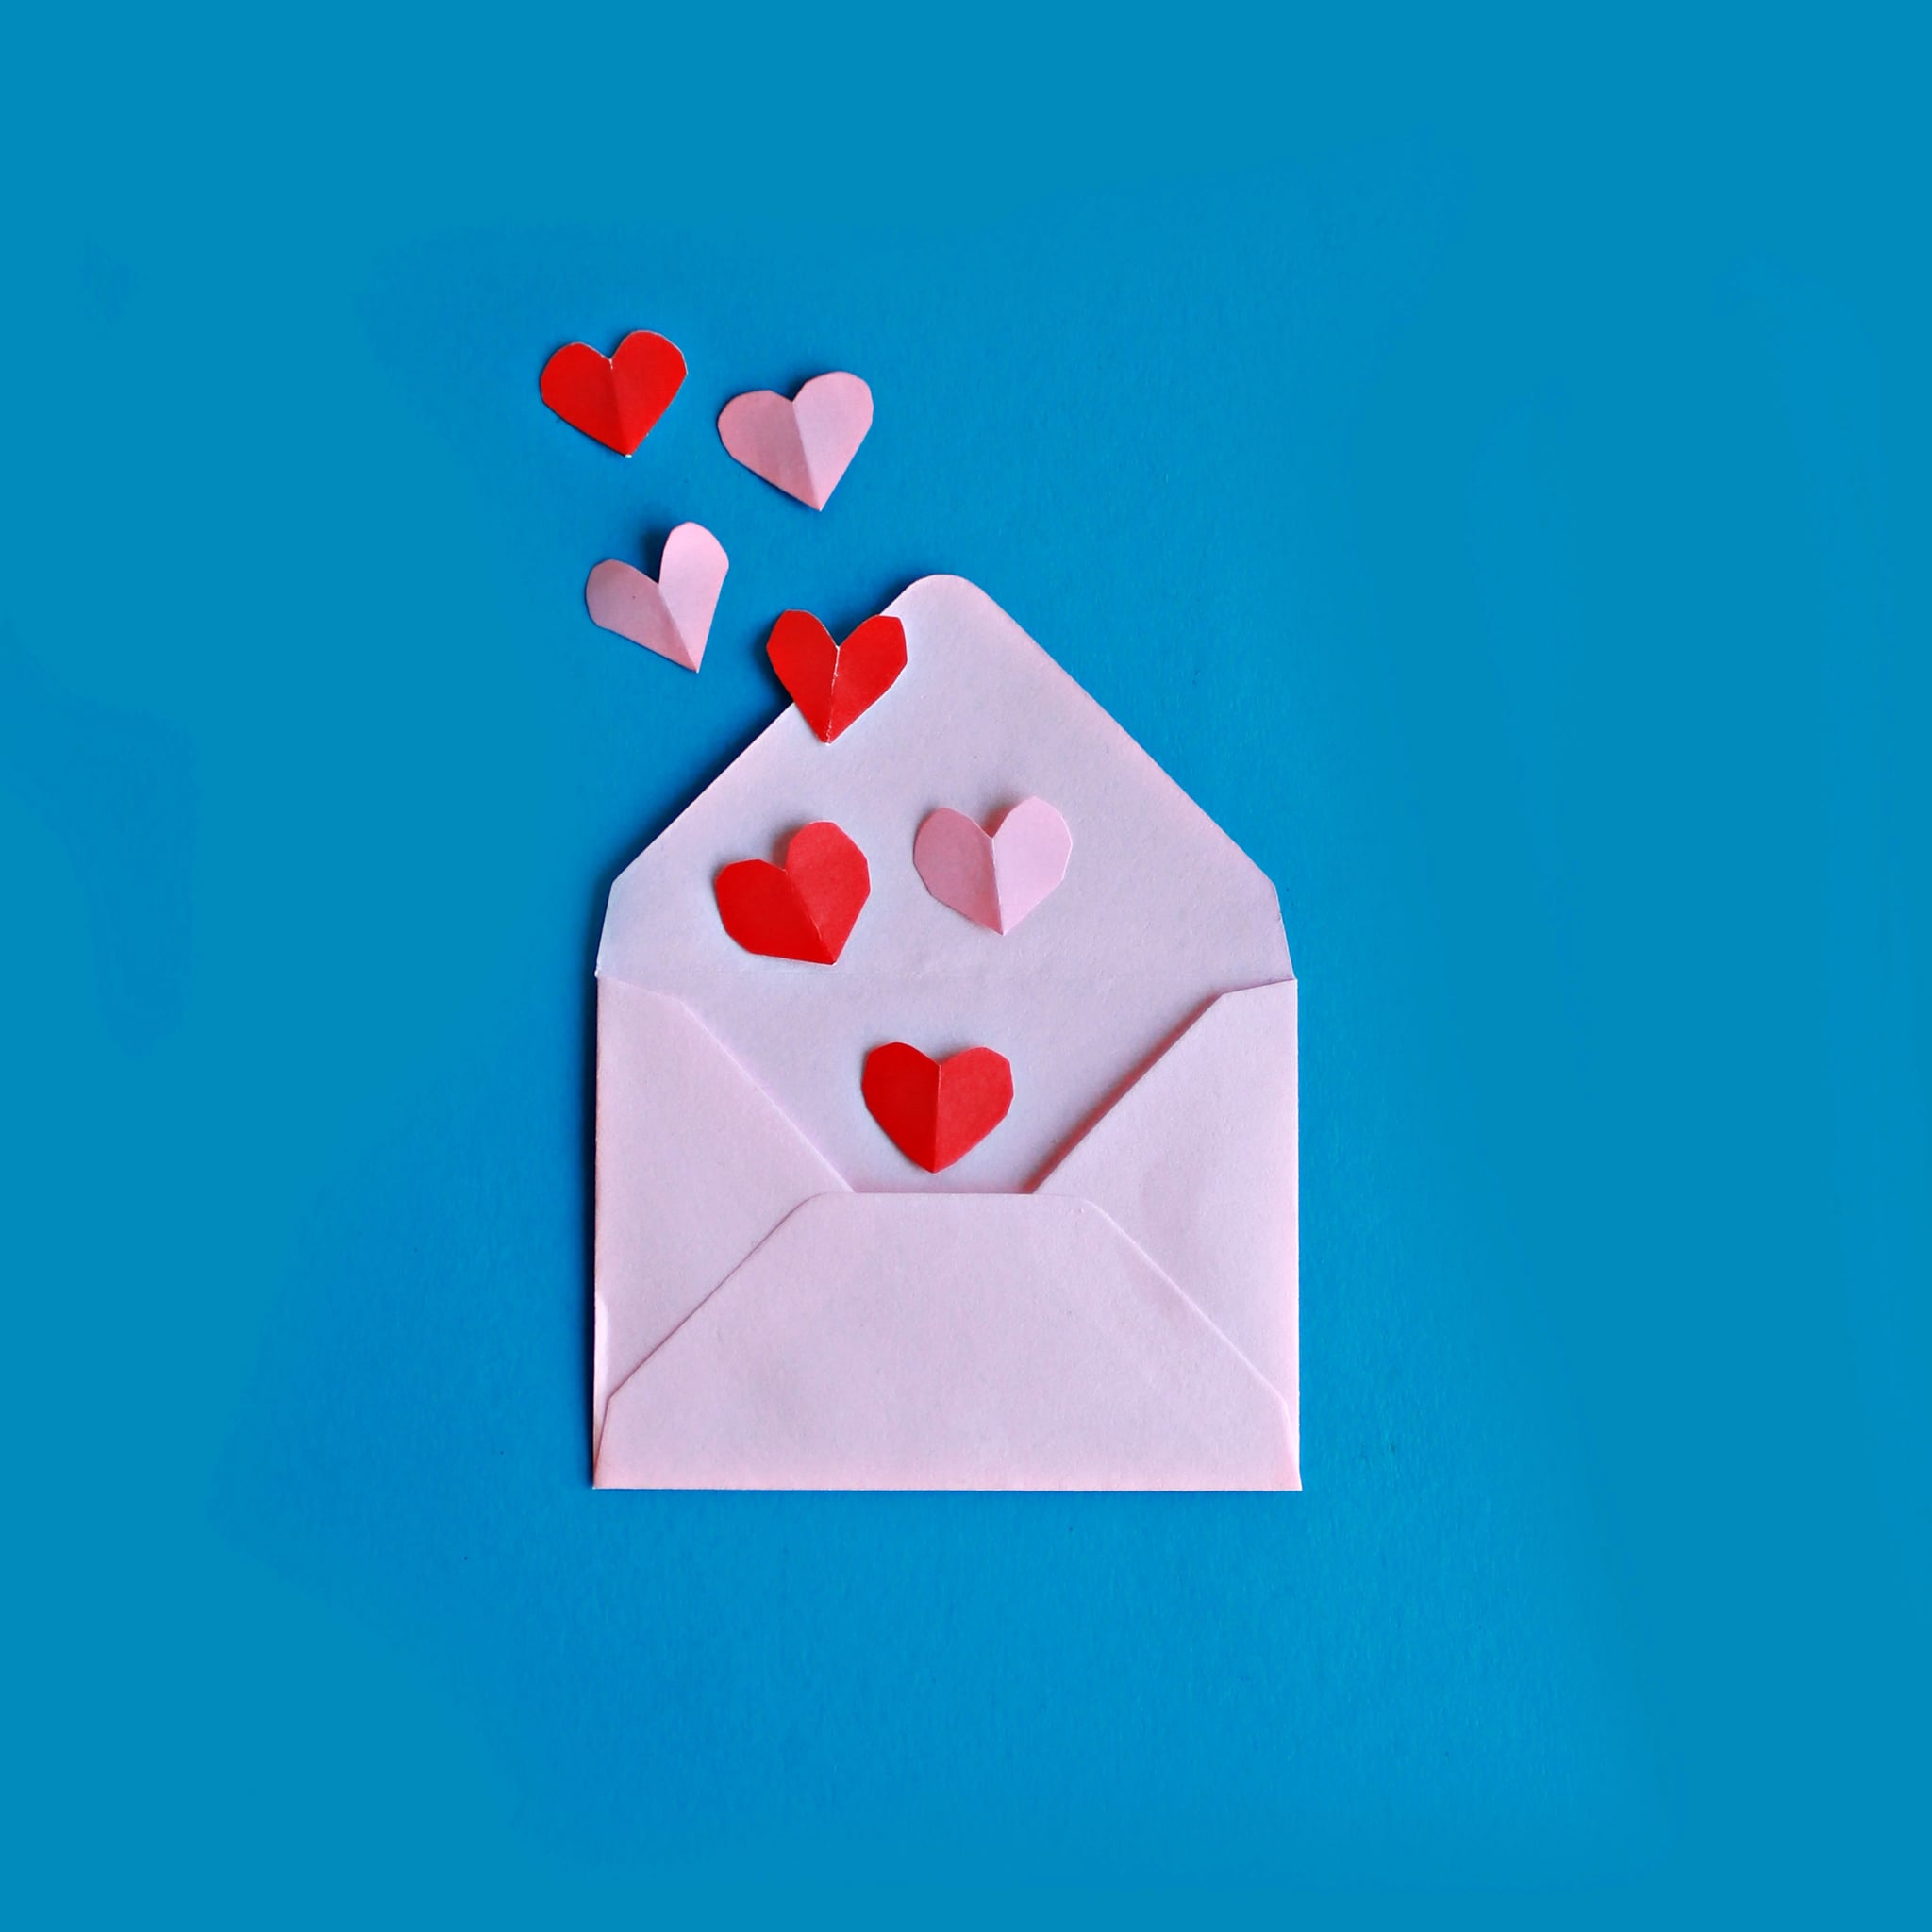 The Cutest Valentine S Day Wallpapers For Your Phone Popsugar Technology Uk